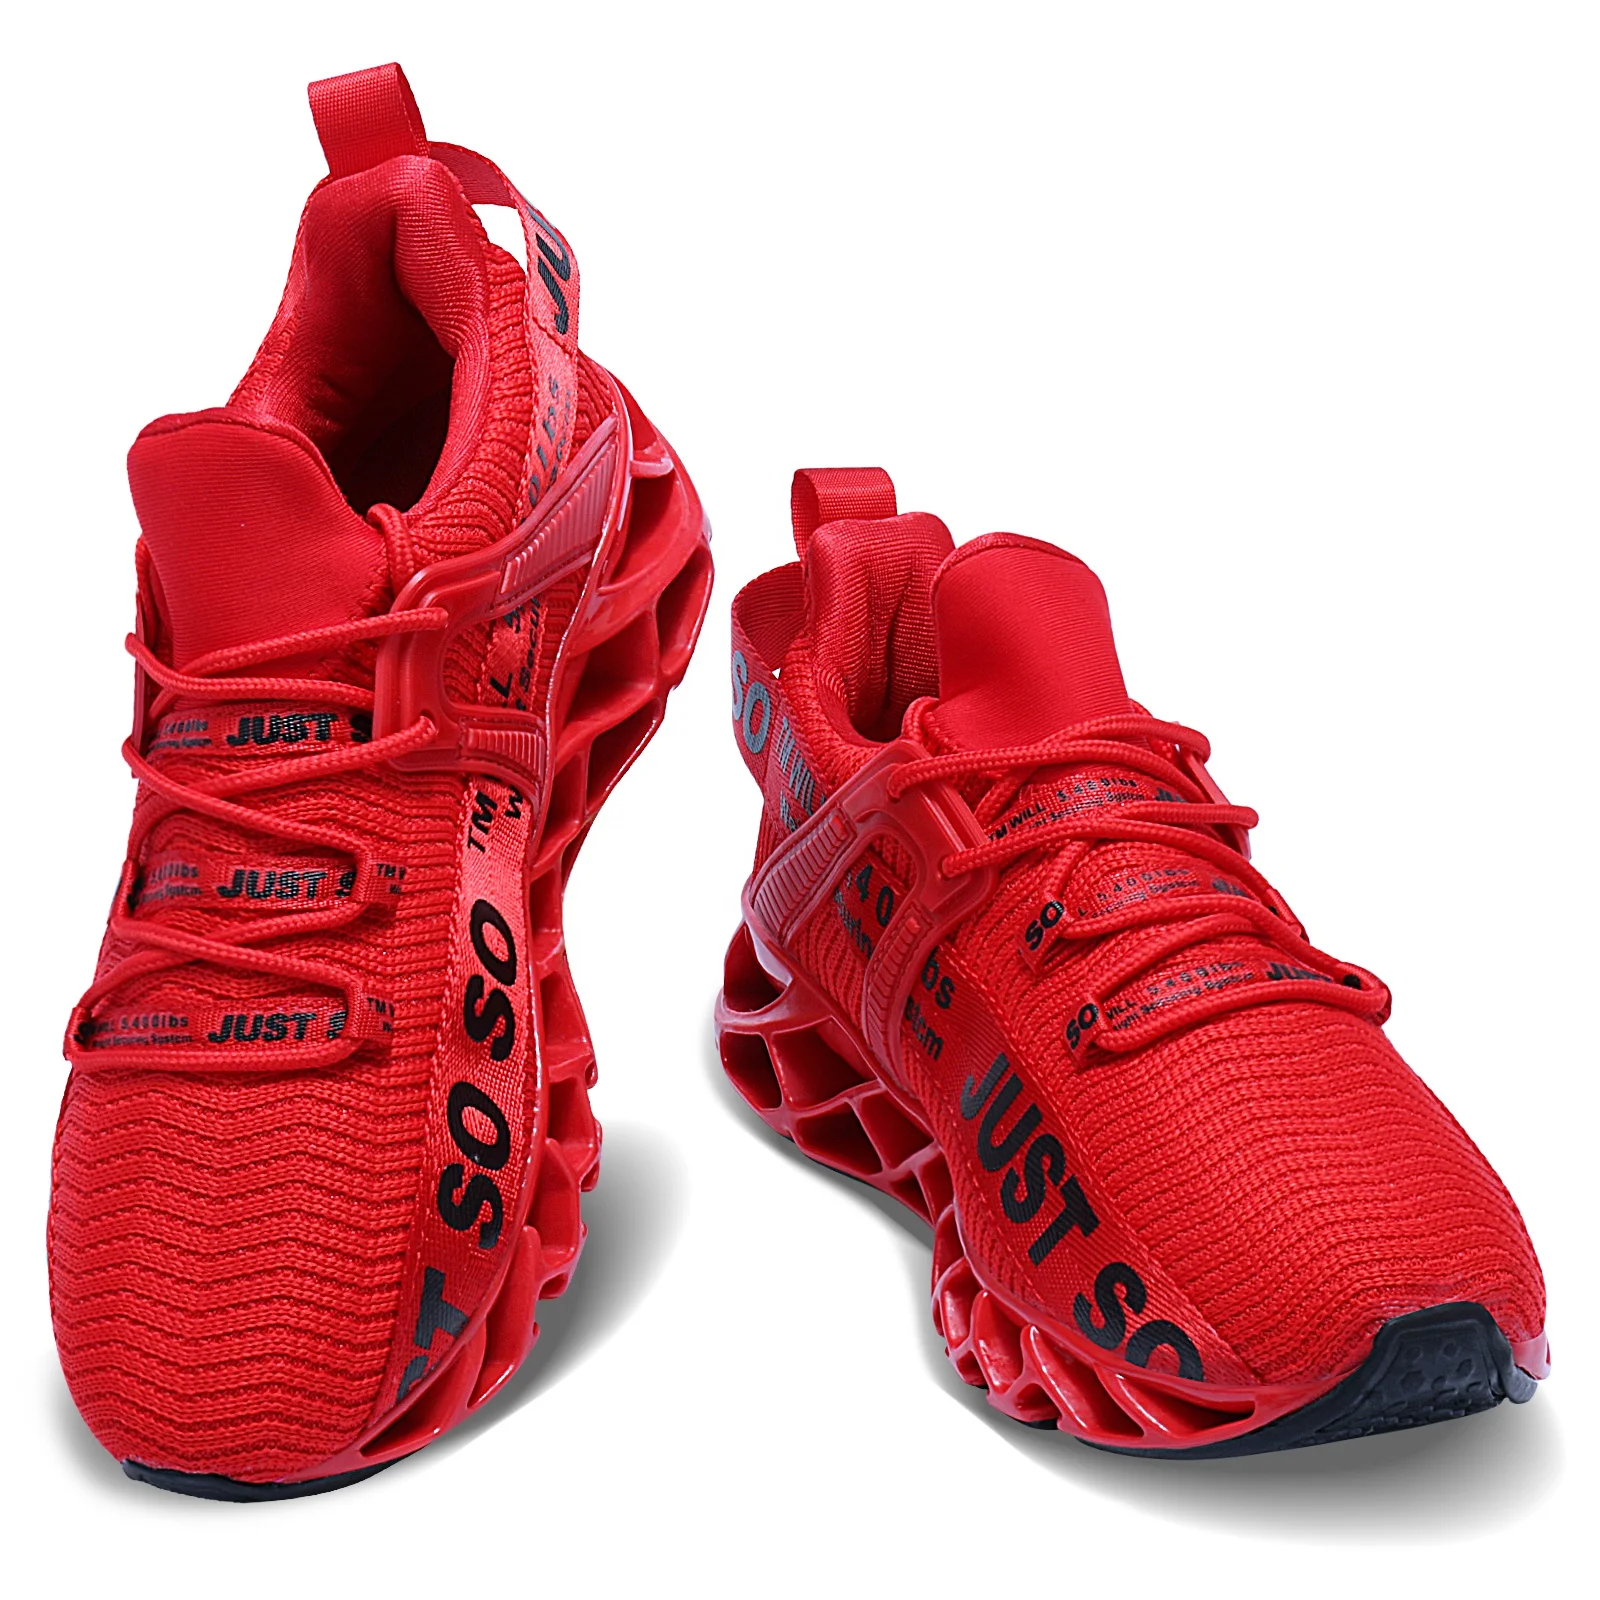 

Just so so Unisex Hot Selling Sneakers Athletic Walking Non Slip Blade Running Tennis Shoes Fashion Women's&Men's Sports Shoes, 28 colors